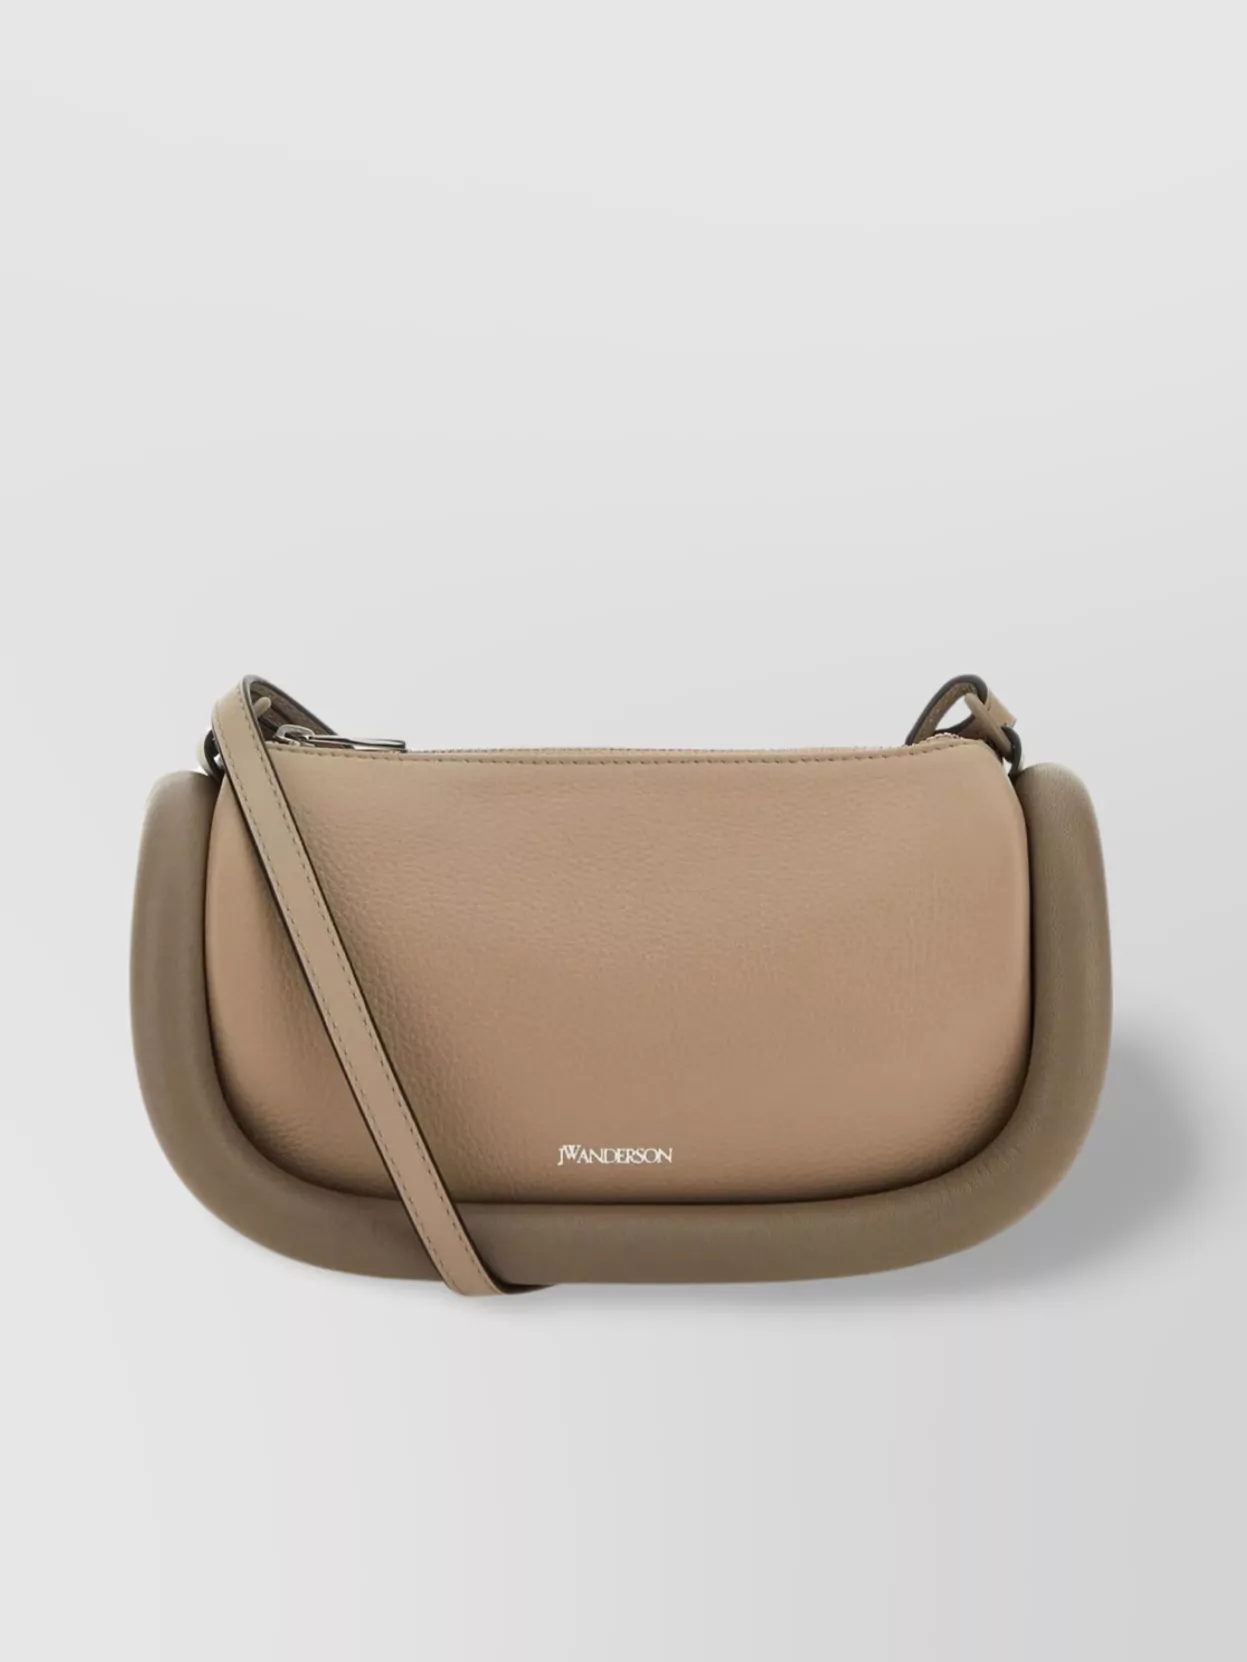 Shop Jw Anderson 12 Crossbody Bag With Curved Silhouette And Adjustable Strap In Beige